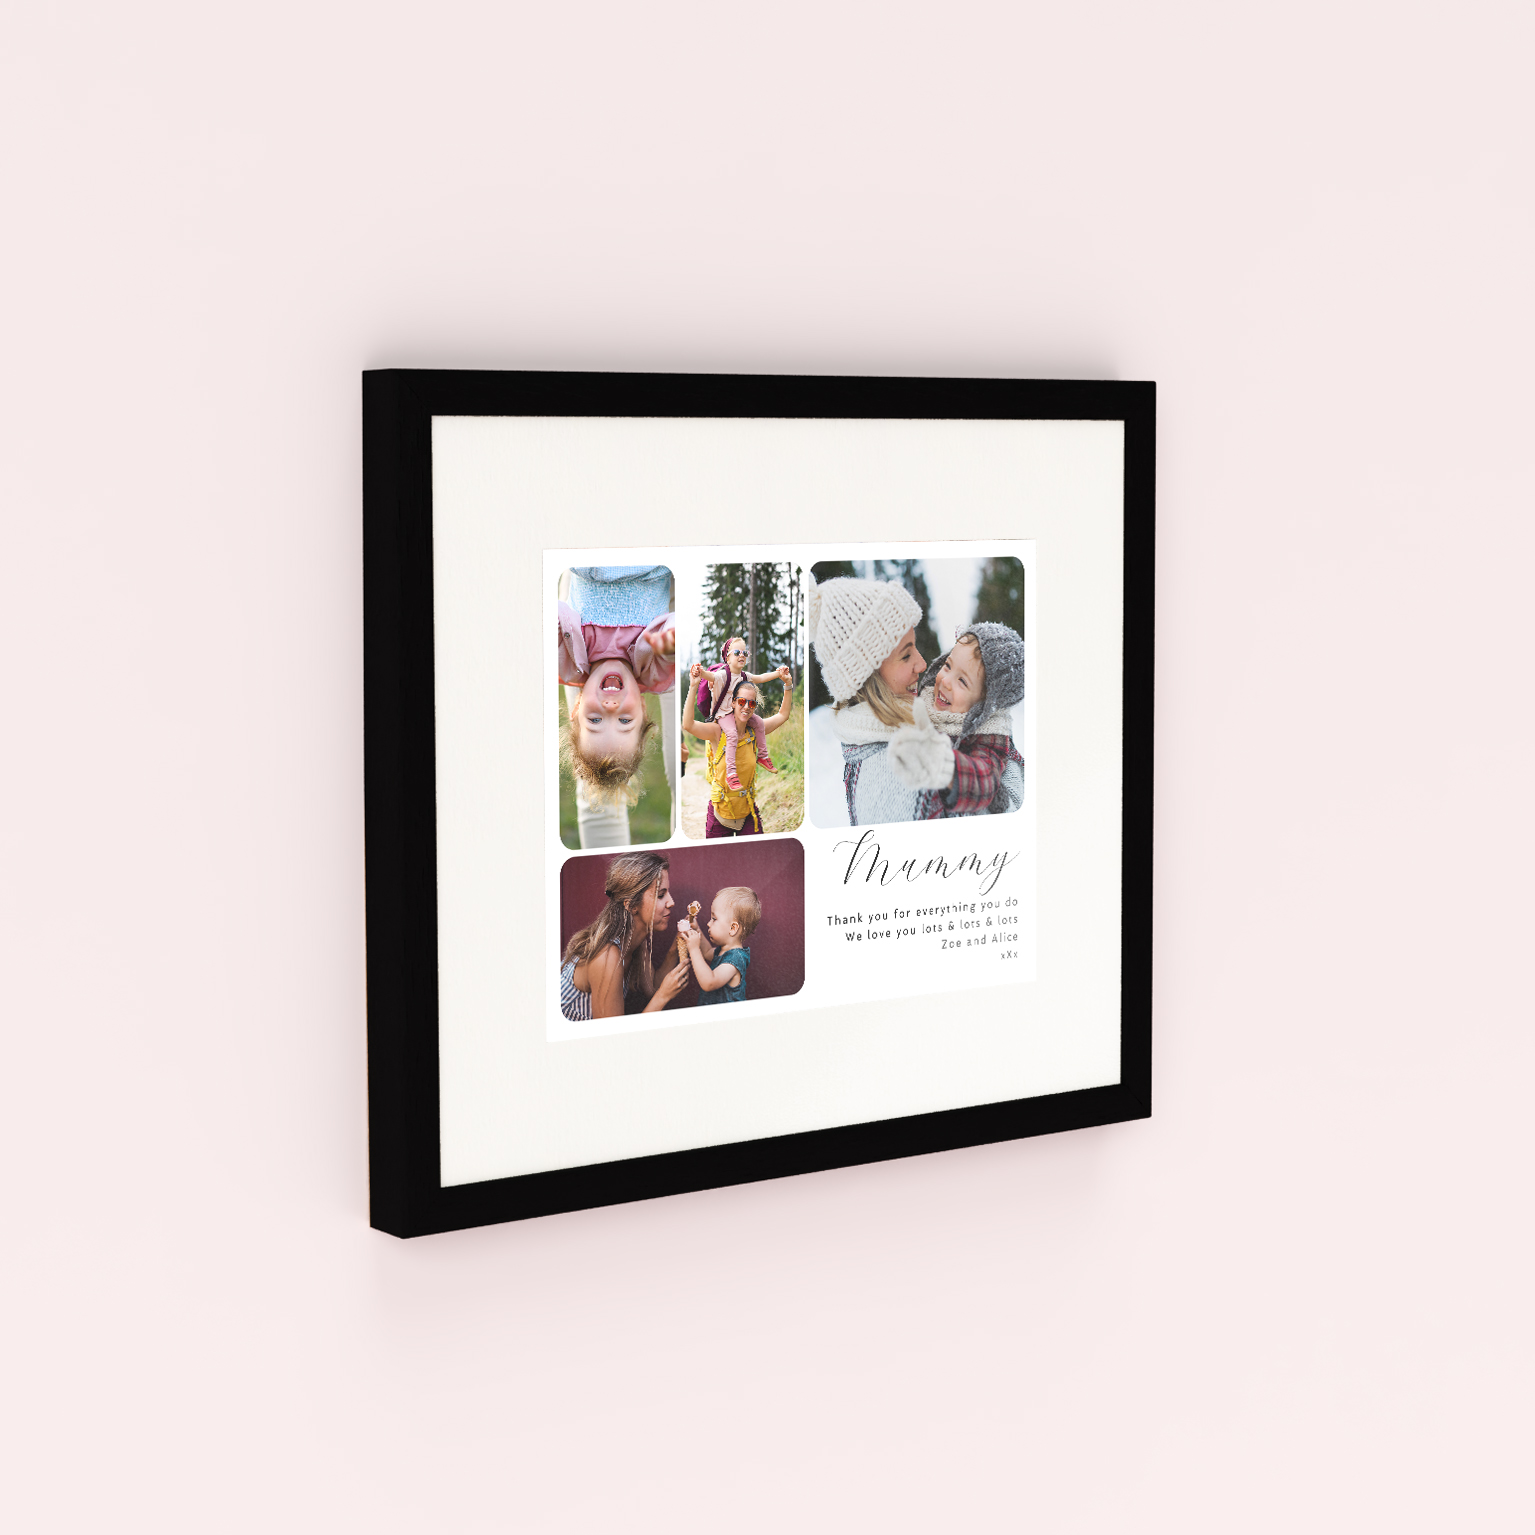 Mother's Day Medley Framed Photo Print - Celebrate Mother's Day with a visually captivating design holding 4 cherished photos.